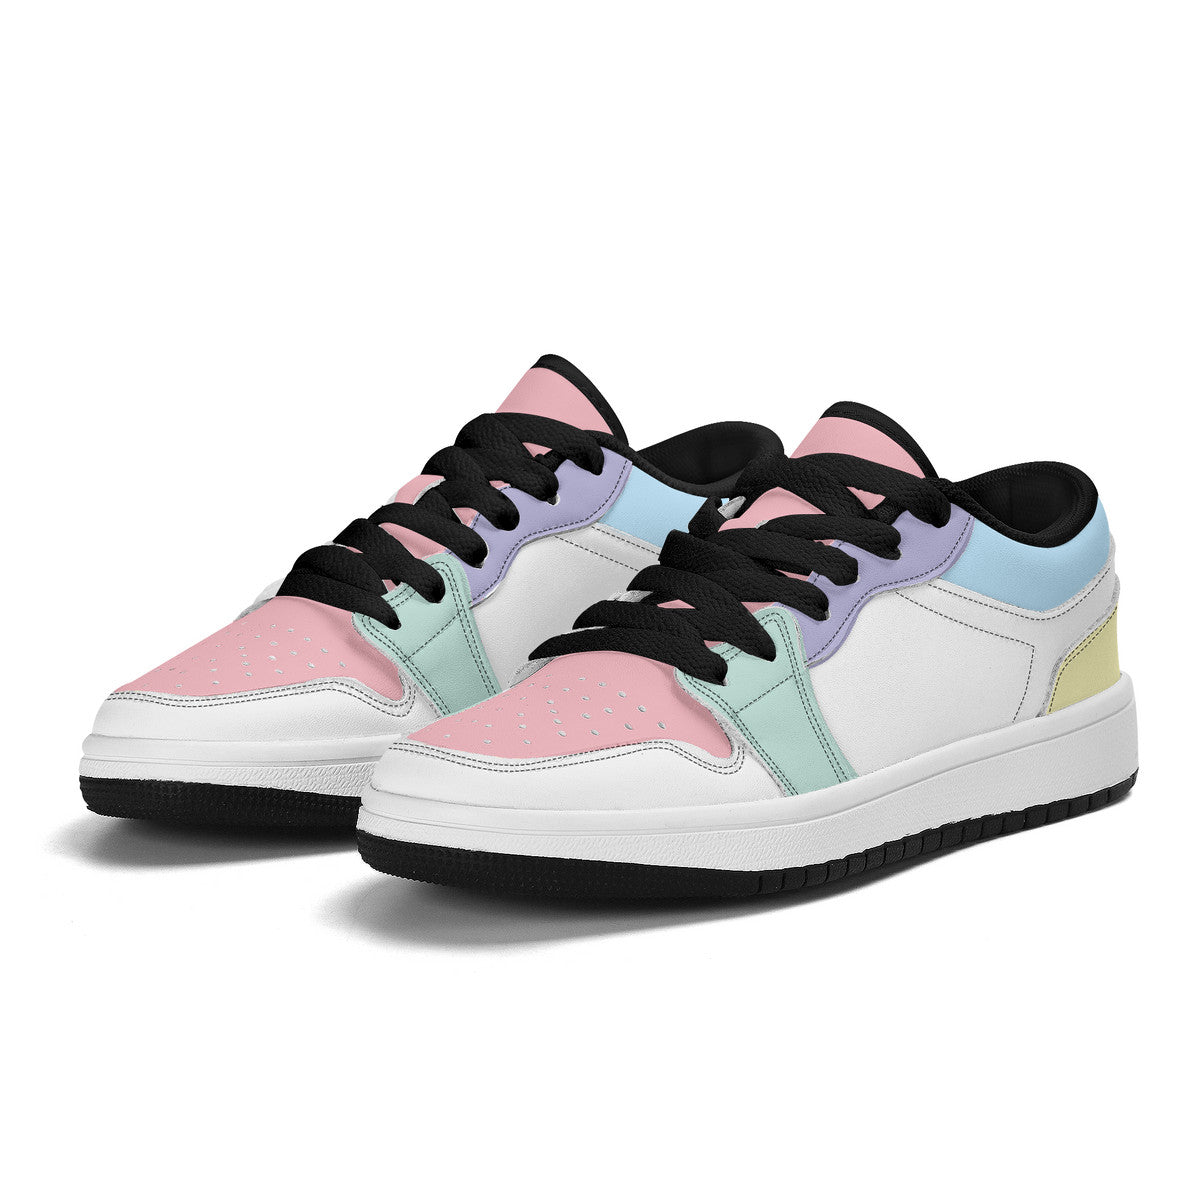 Personalize Your Own Kids Low-Top PU Leather Sneakers-Pastel Colors